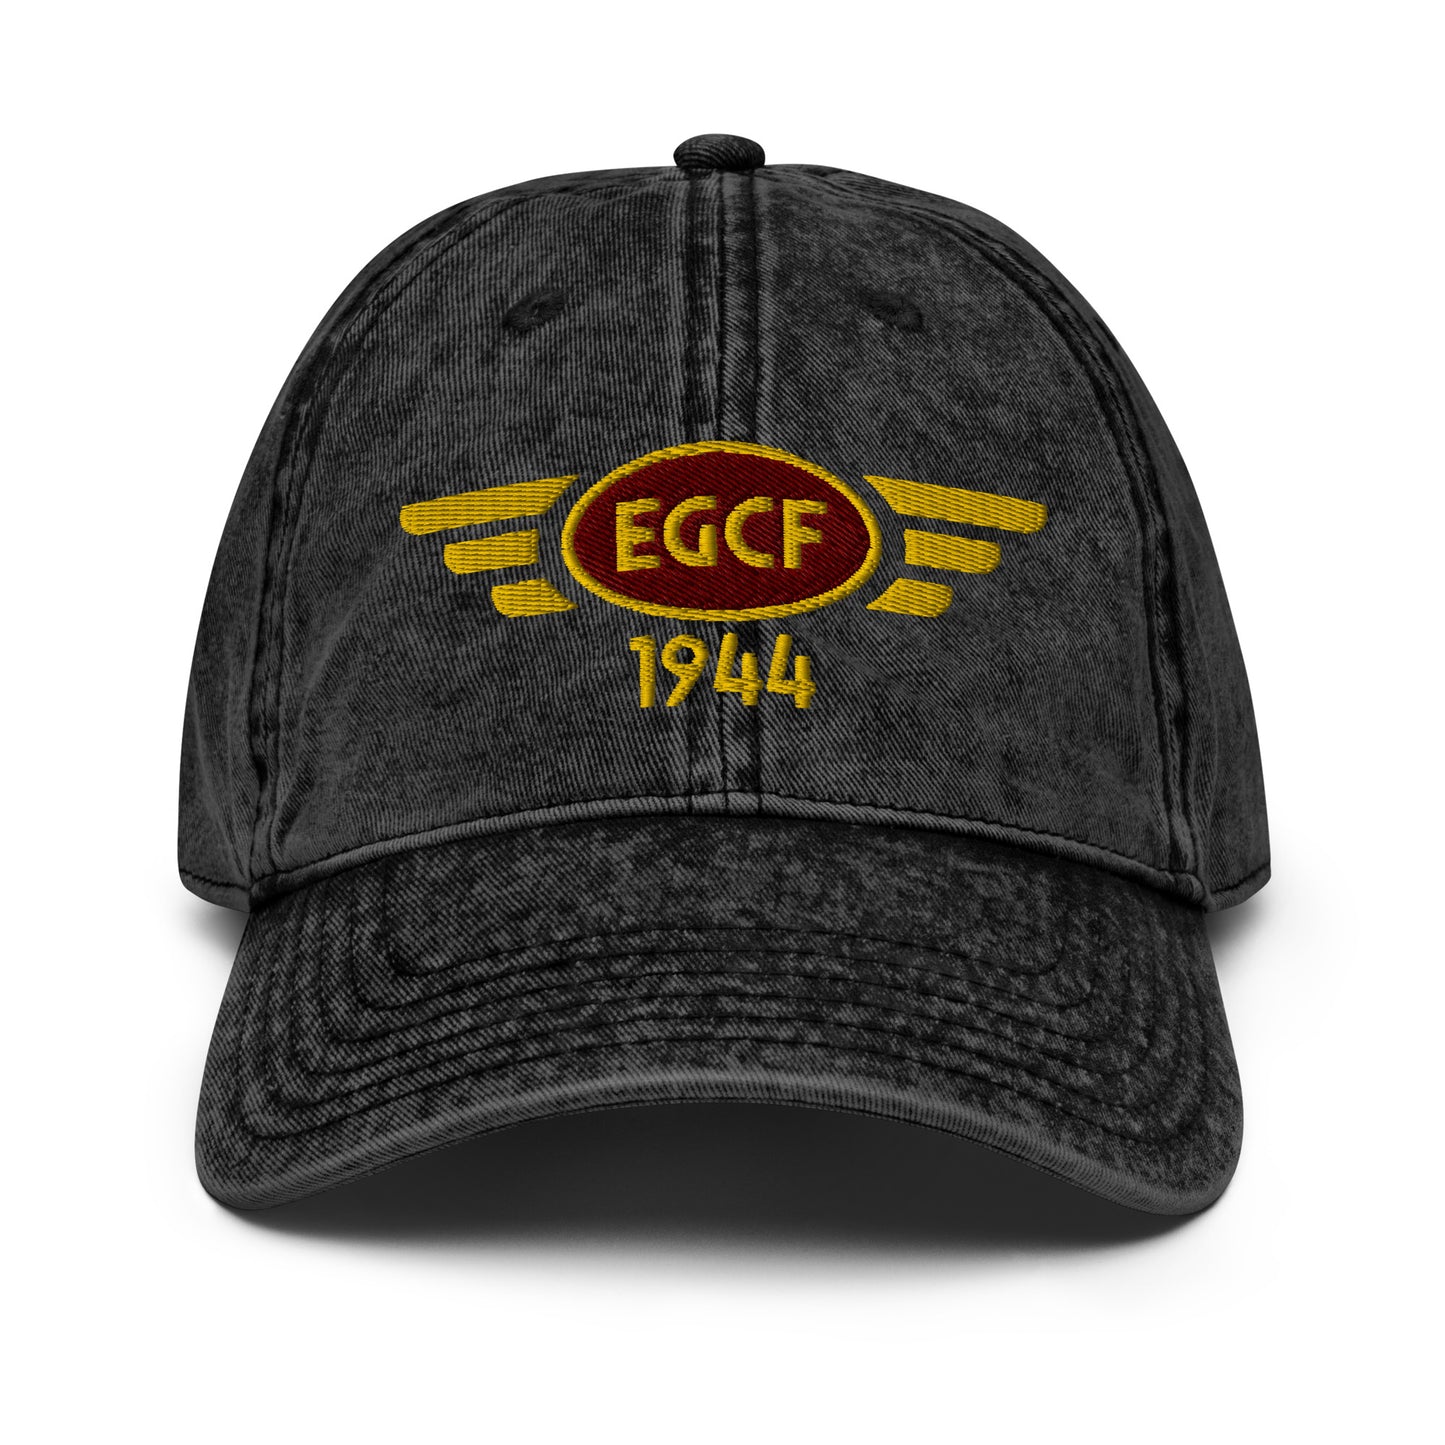 Black cotton twill baseball cap with embroidered vintage style aviation logo for Sandtoft Airfield.